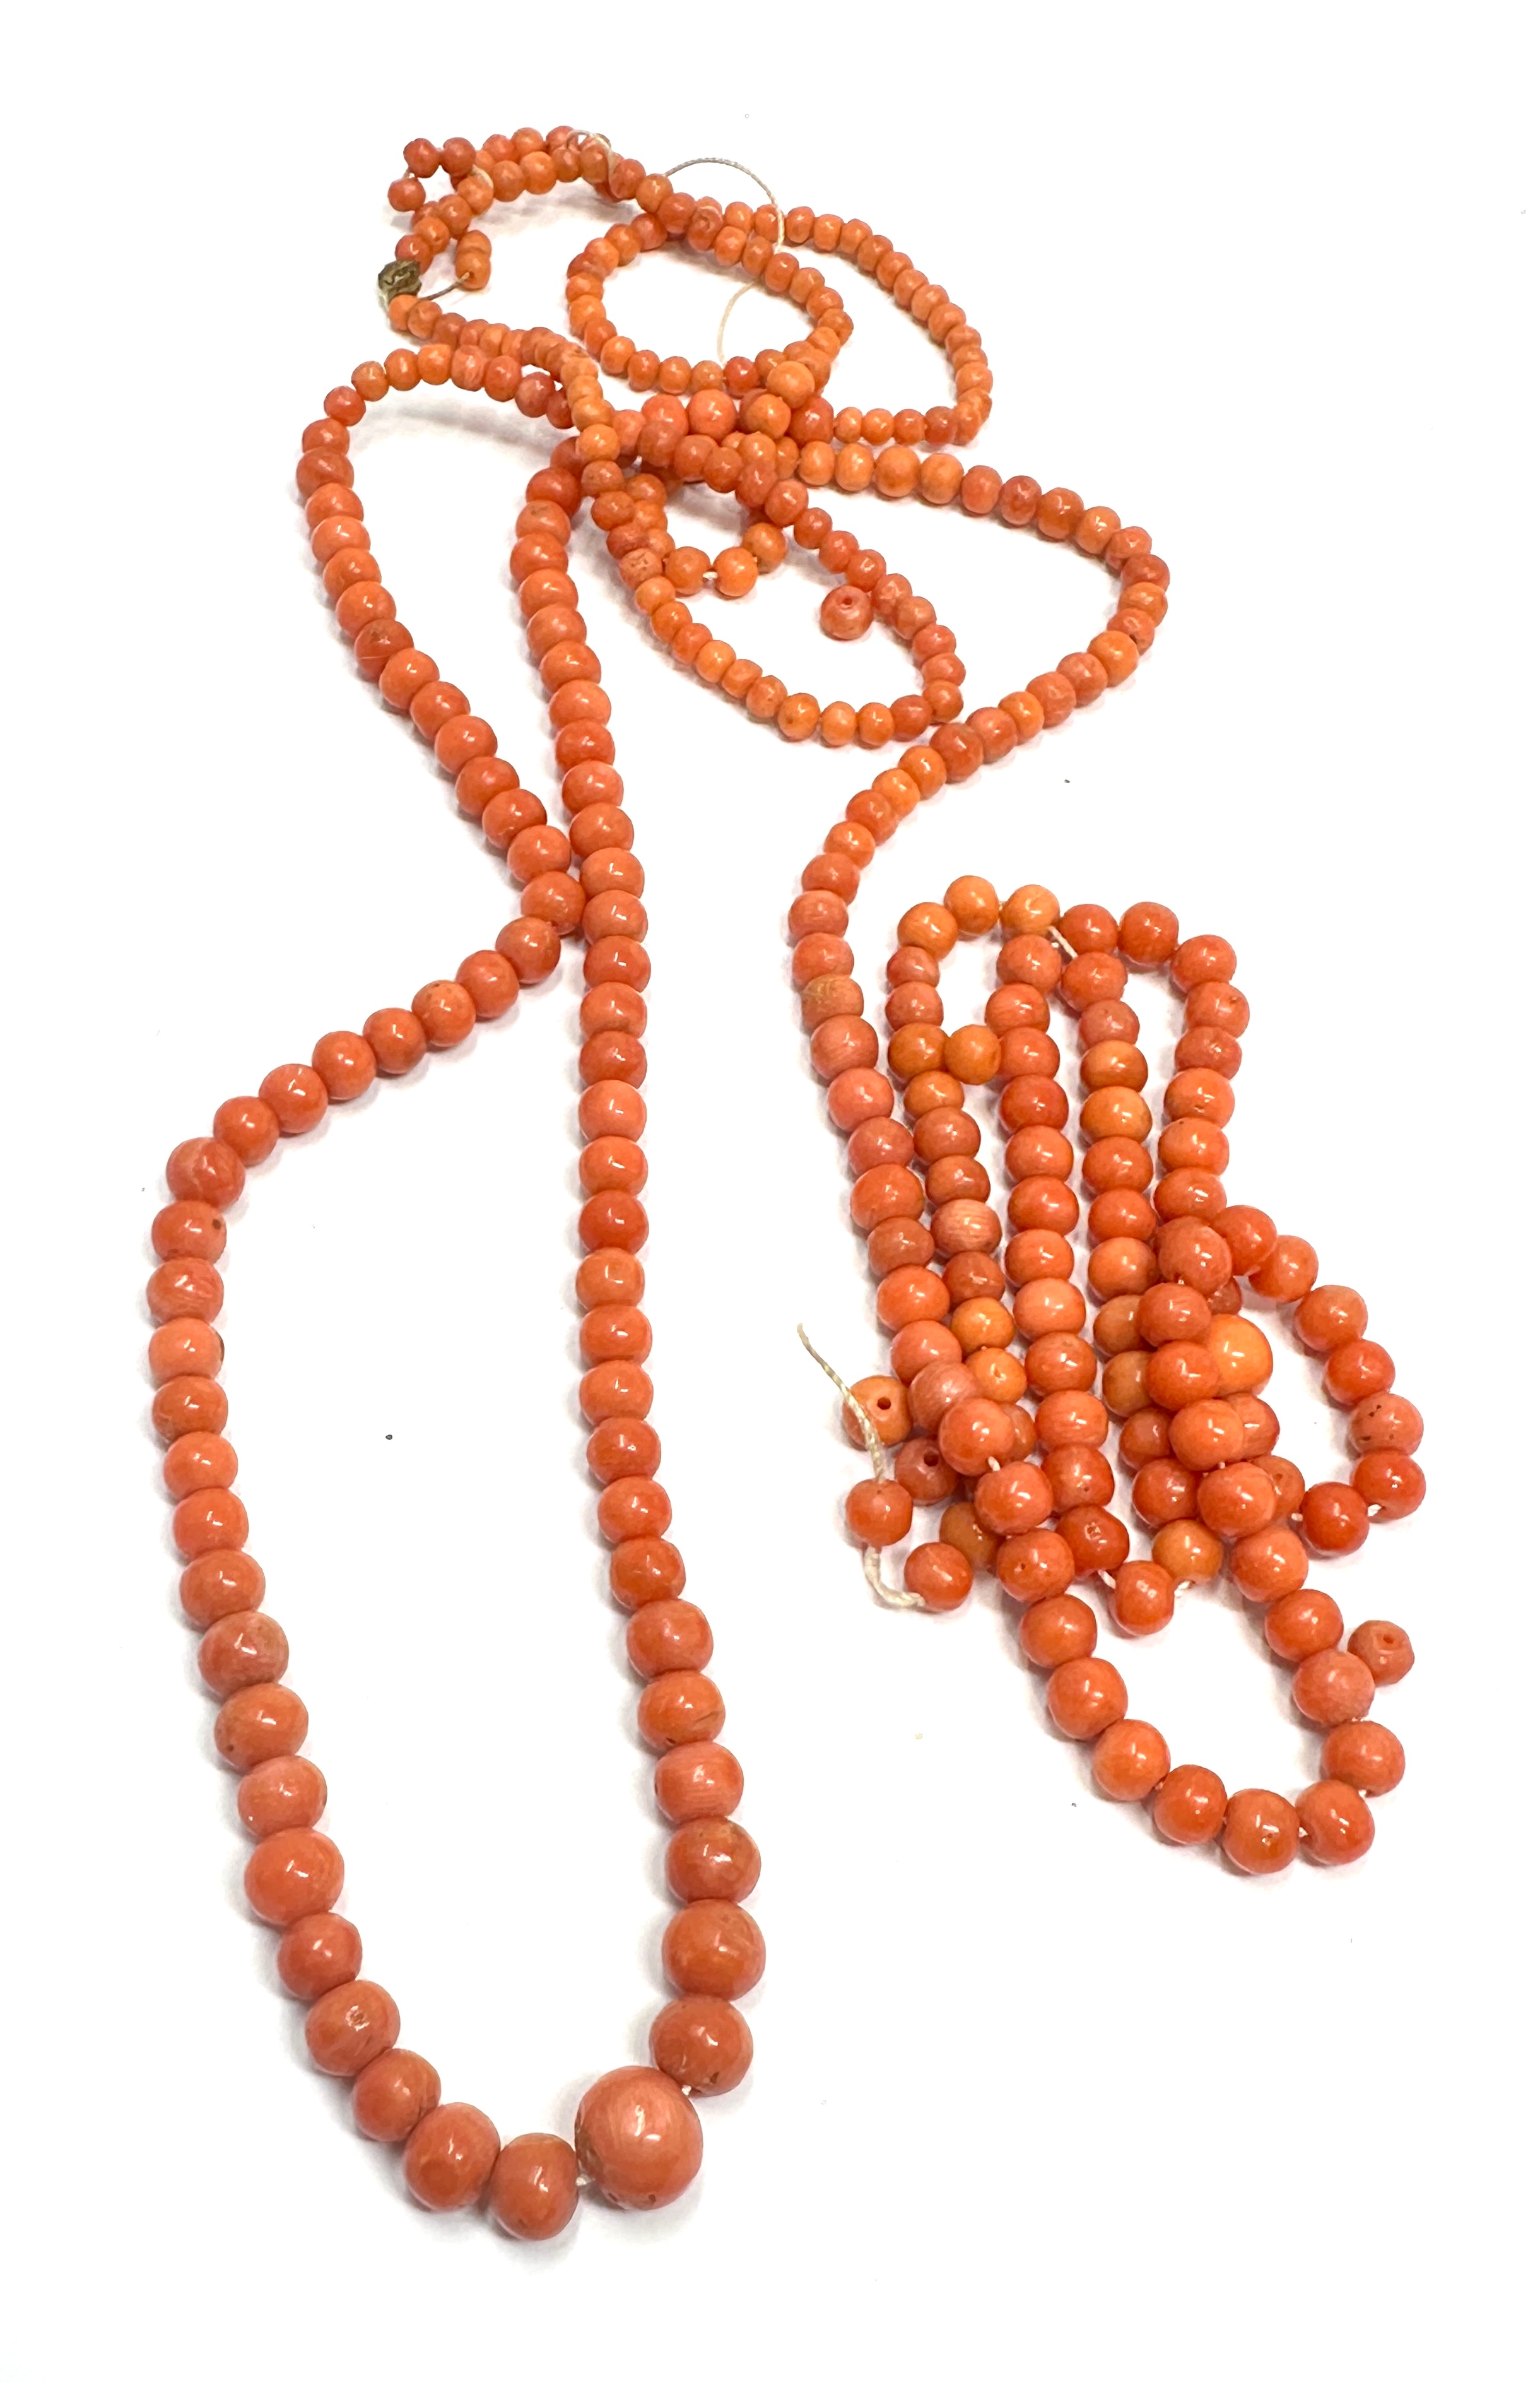 Antique red coral bead necklace for restringing weight 48g